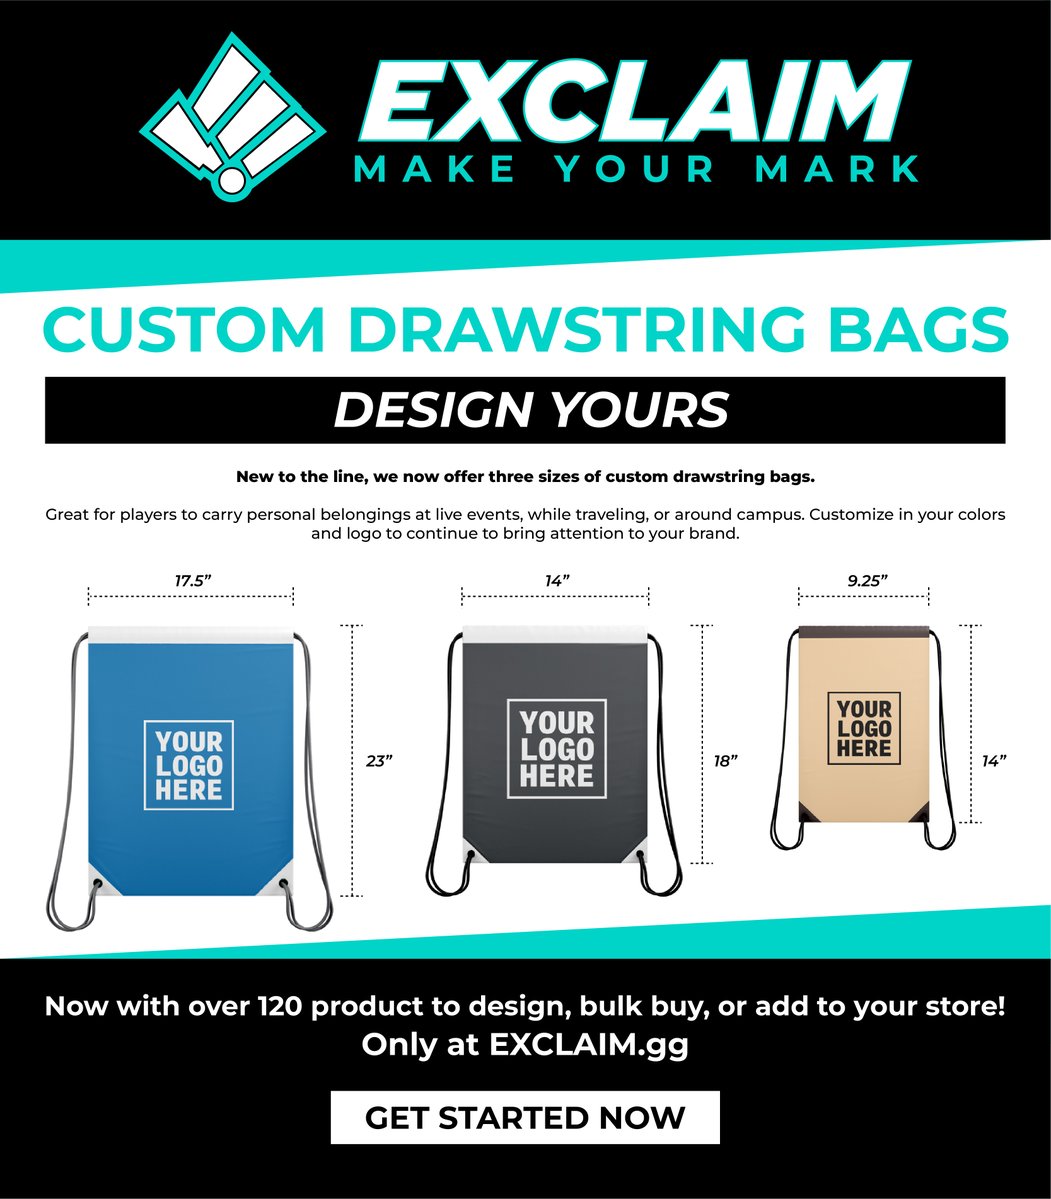 Jerseys aren't our only specialty😈
#CustomBags available now at Exclaim.gg ‼️
Design and get yours now🔽🔽🔽
exclaim.gg/builder?produc…